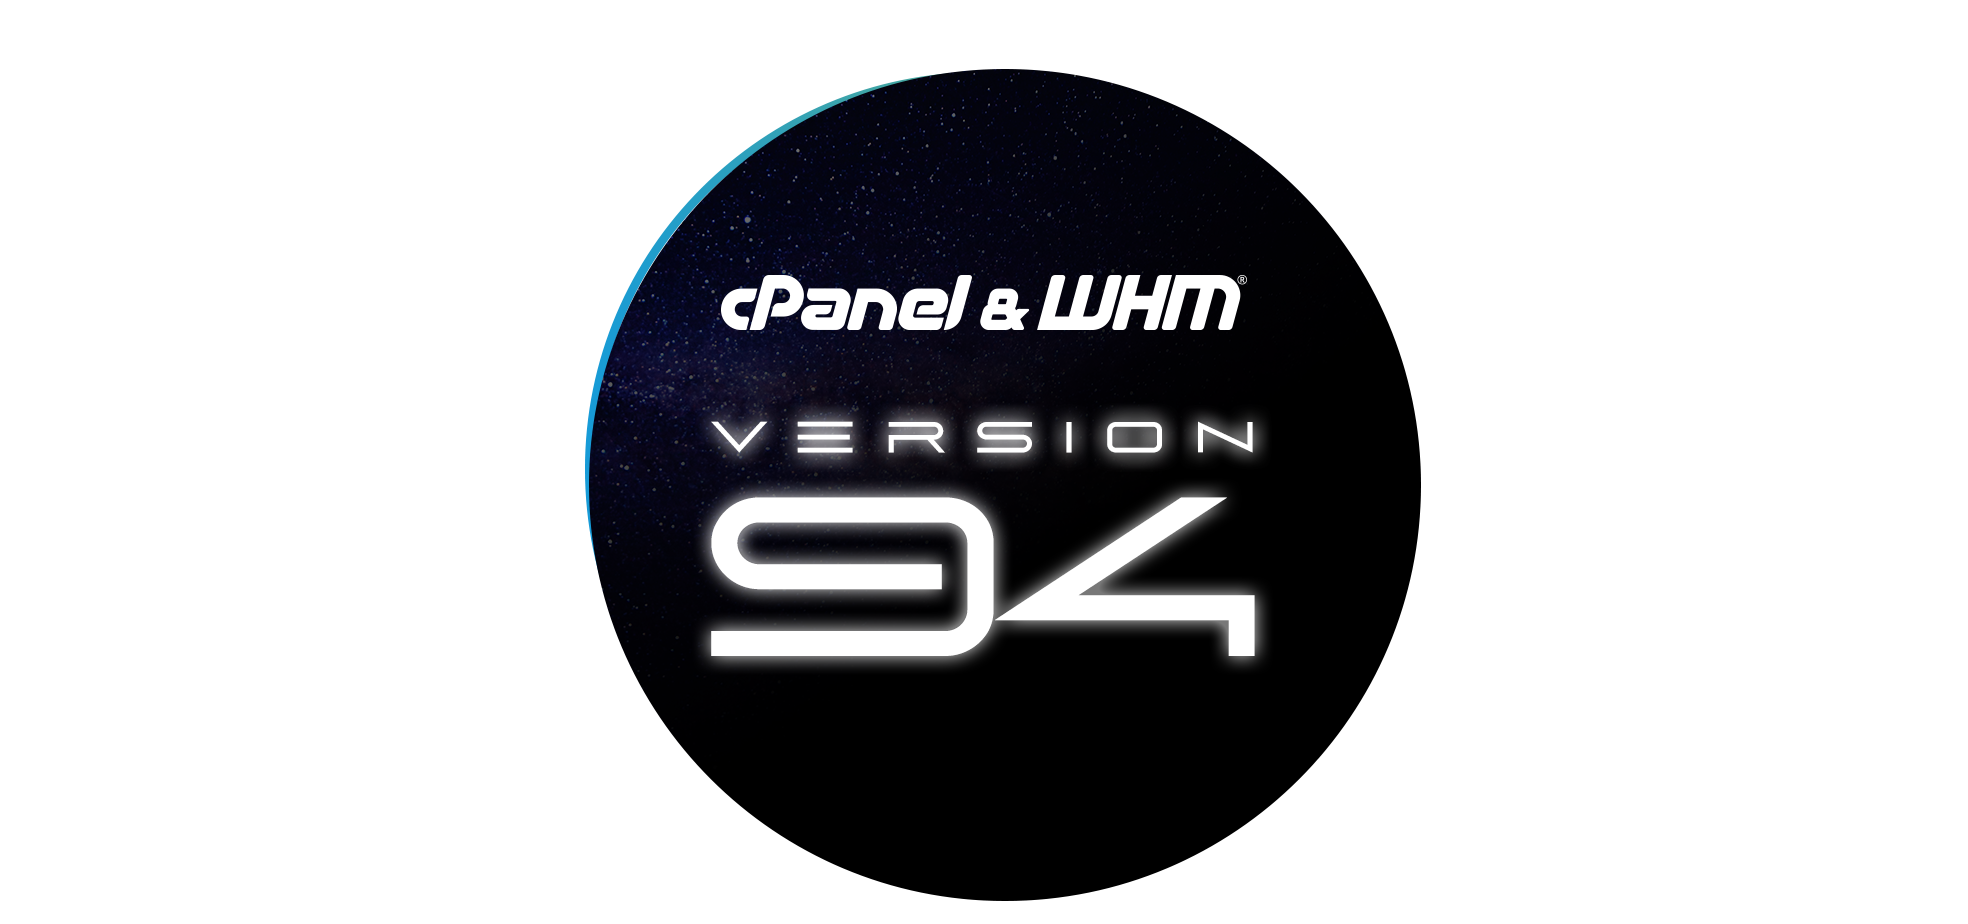 Announcing cPanel & WHM Version 94